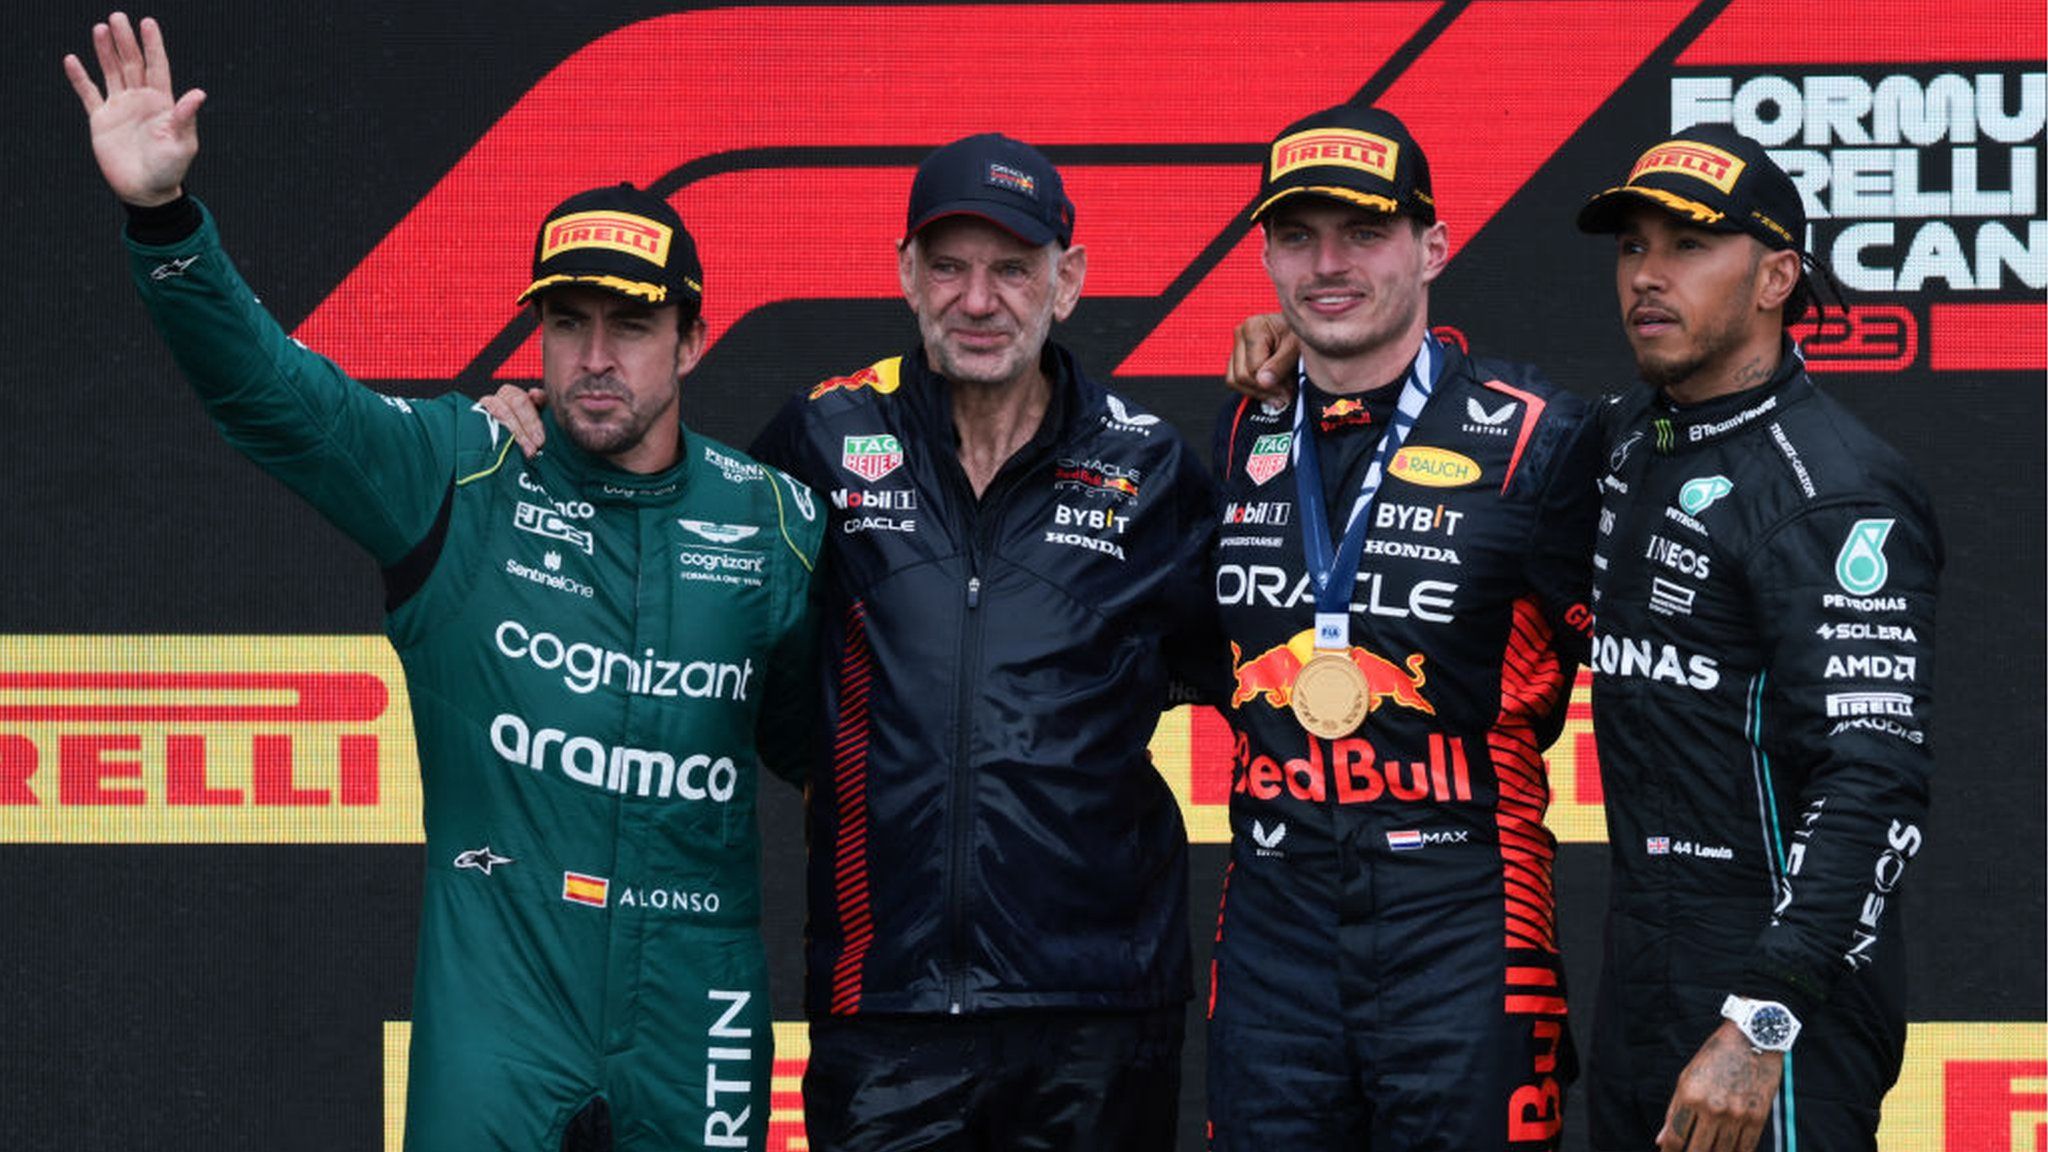 Fernando Alonso, Max Verstappen and Lewis Hamilton share a podium together in Canada last season